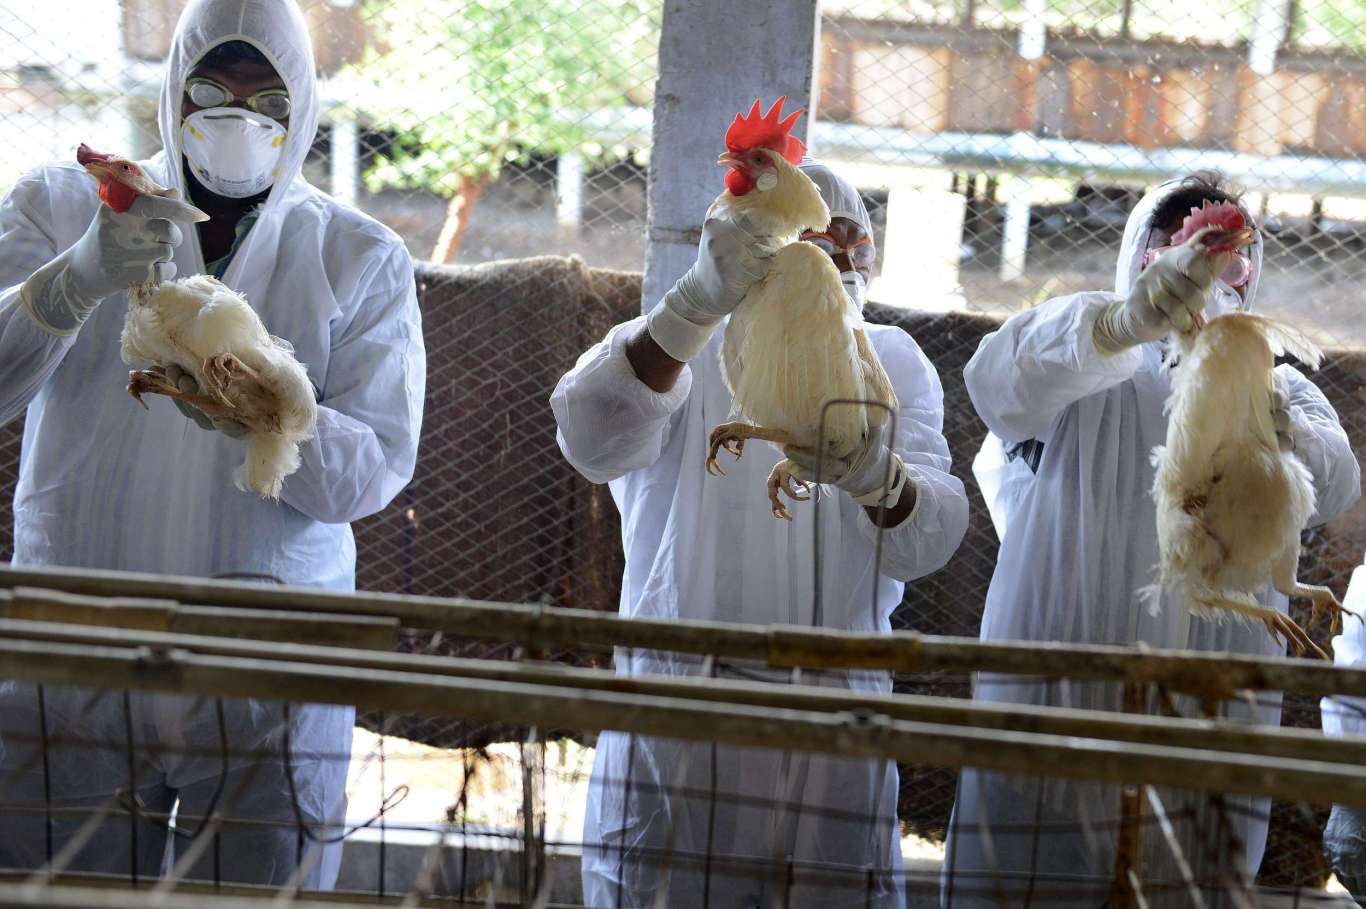 More than 50 million birds die of avian flu in the United States